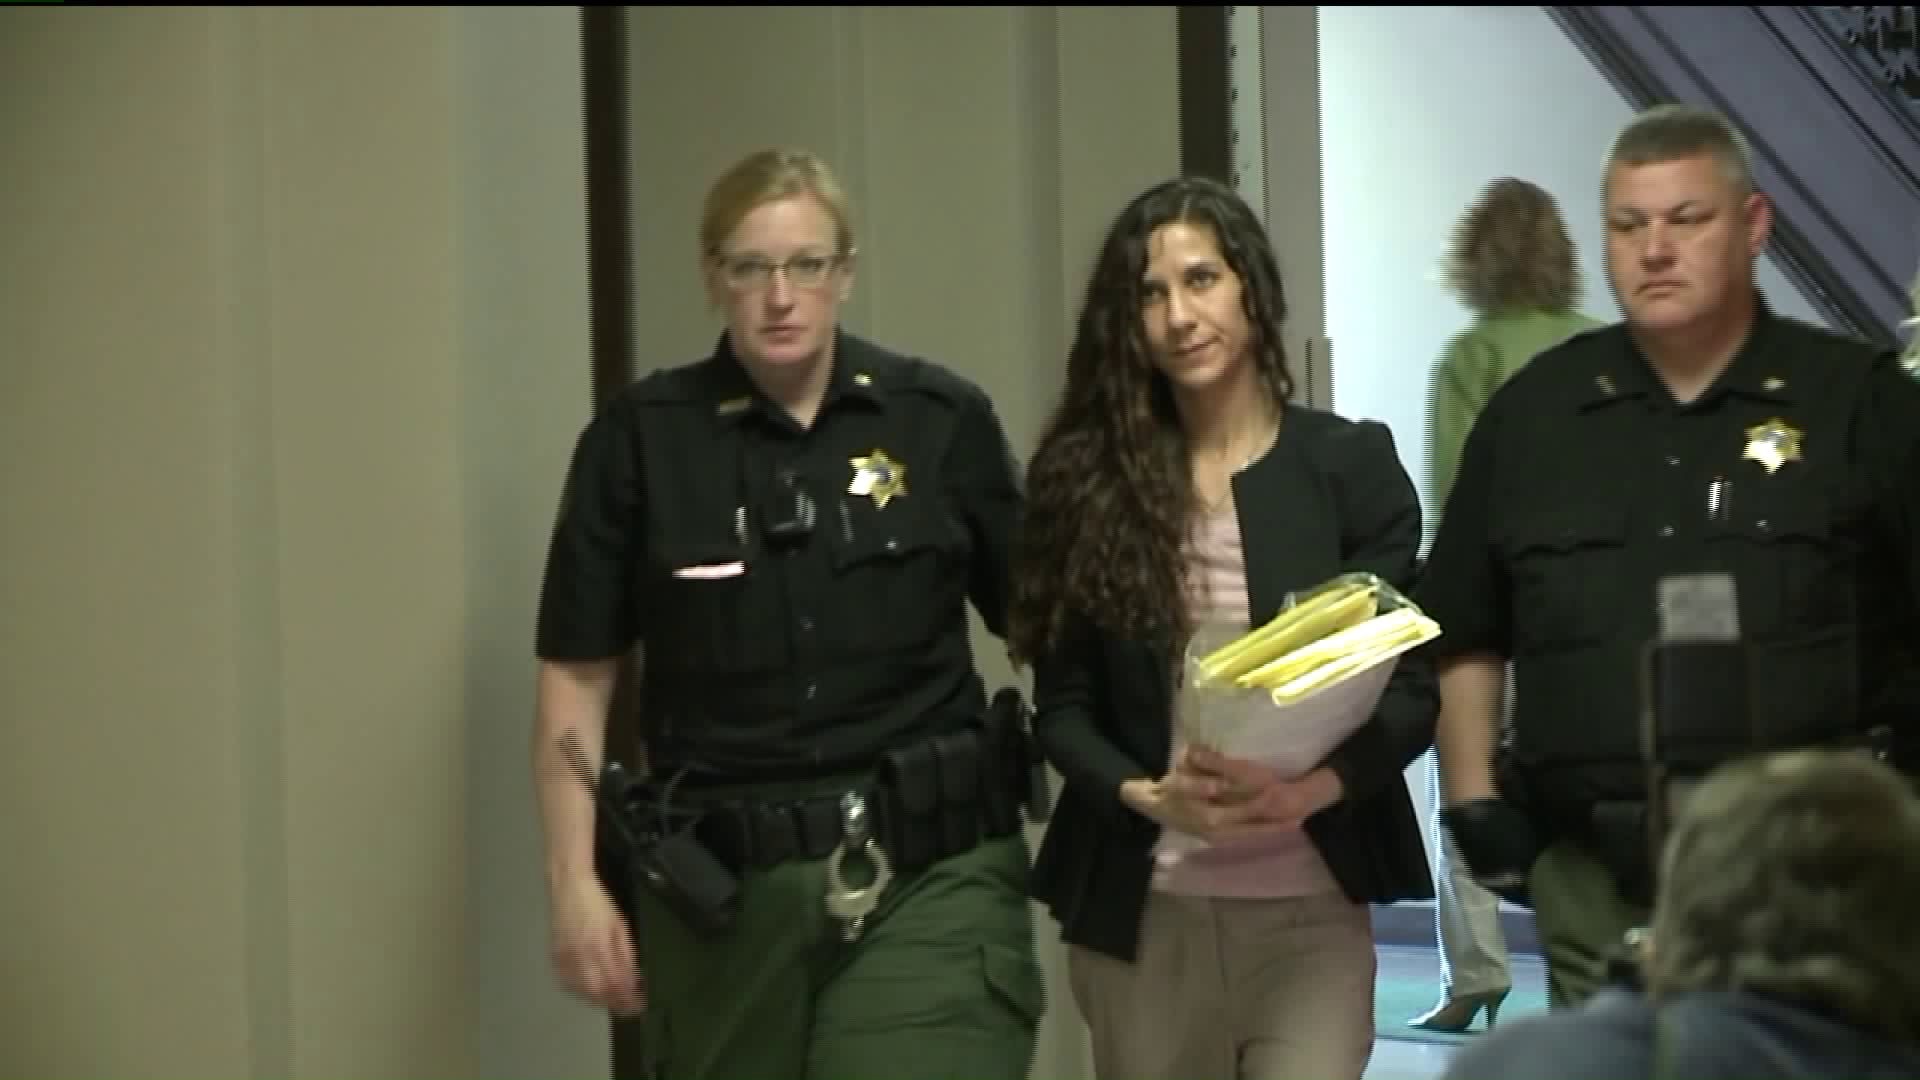 Jury Selection Expected in Case of Mother Accused of Trying to Kill Herself, Her Children